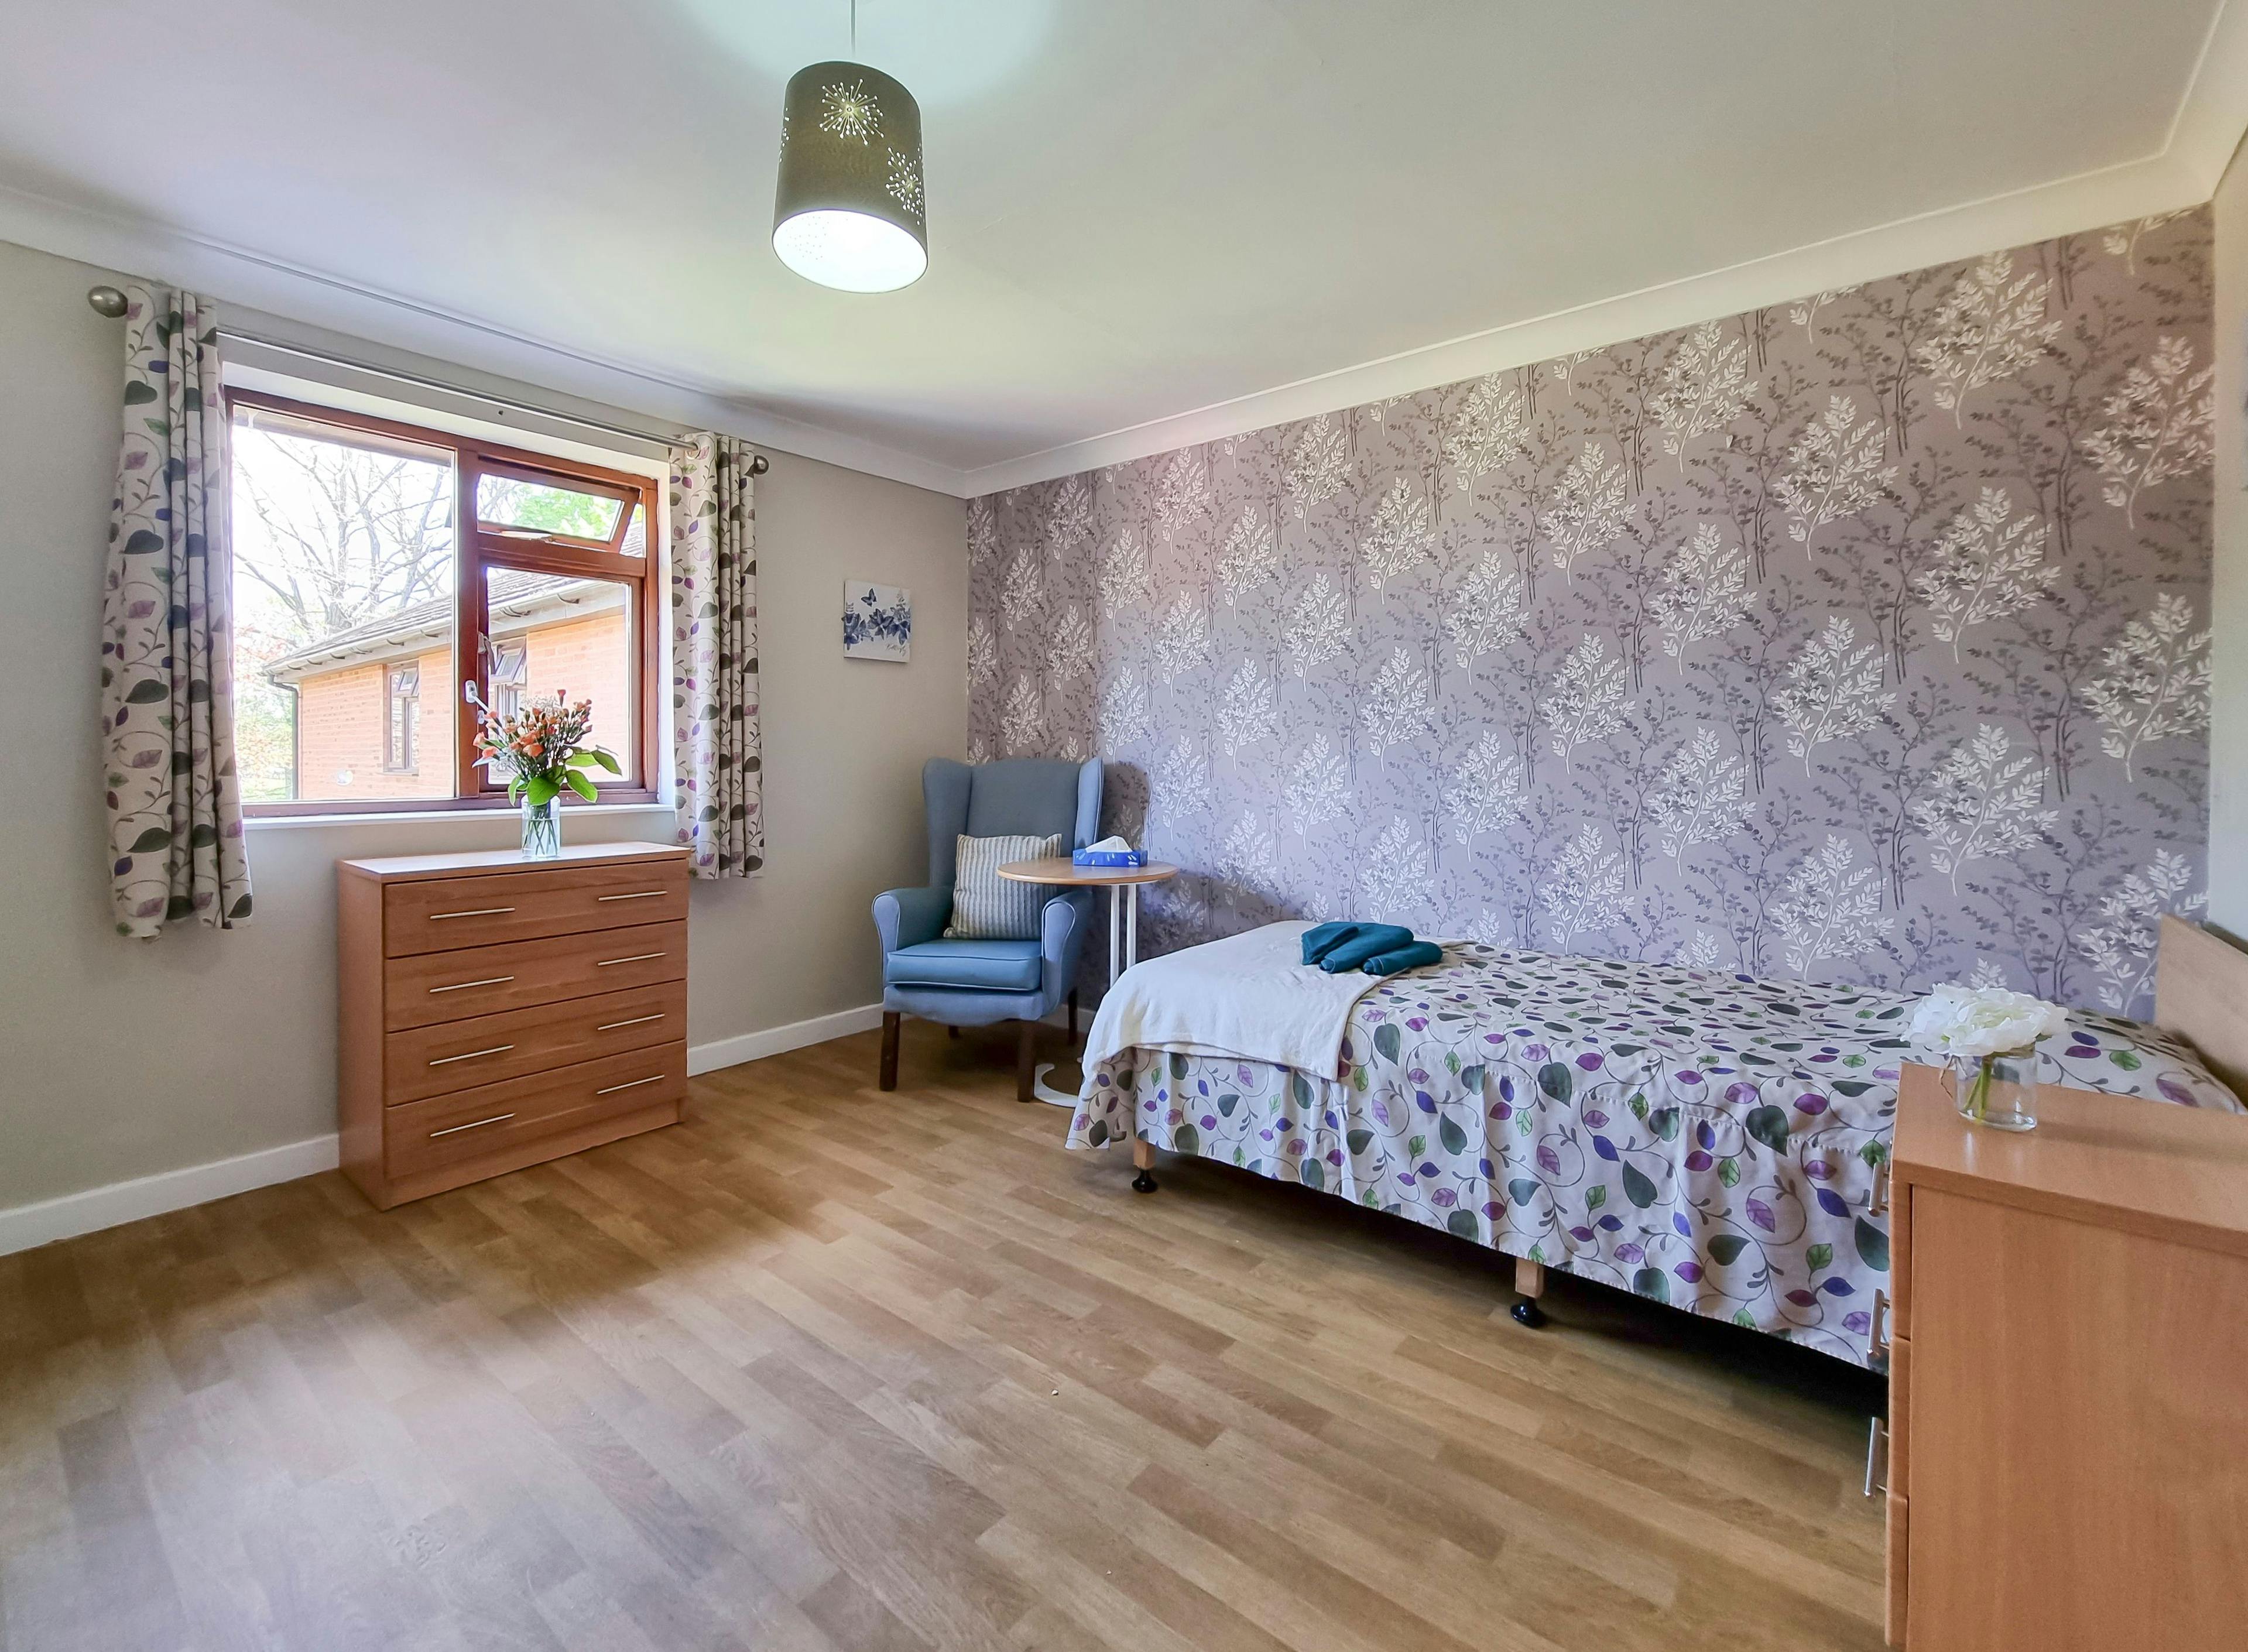 Buckland Care - Willow Bank House care home 2